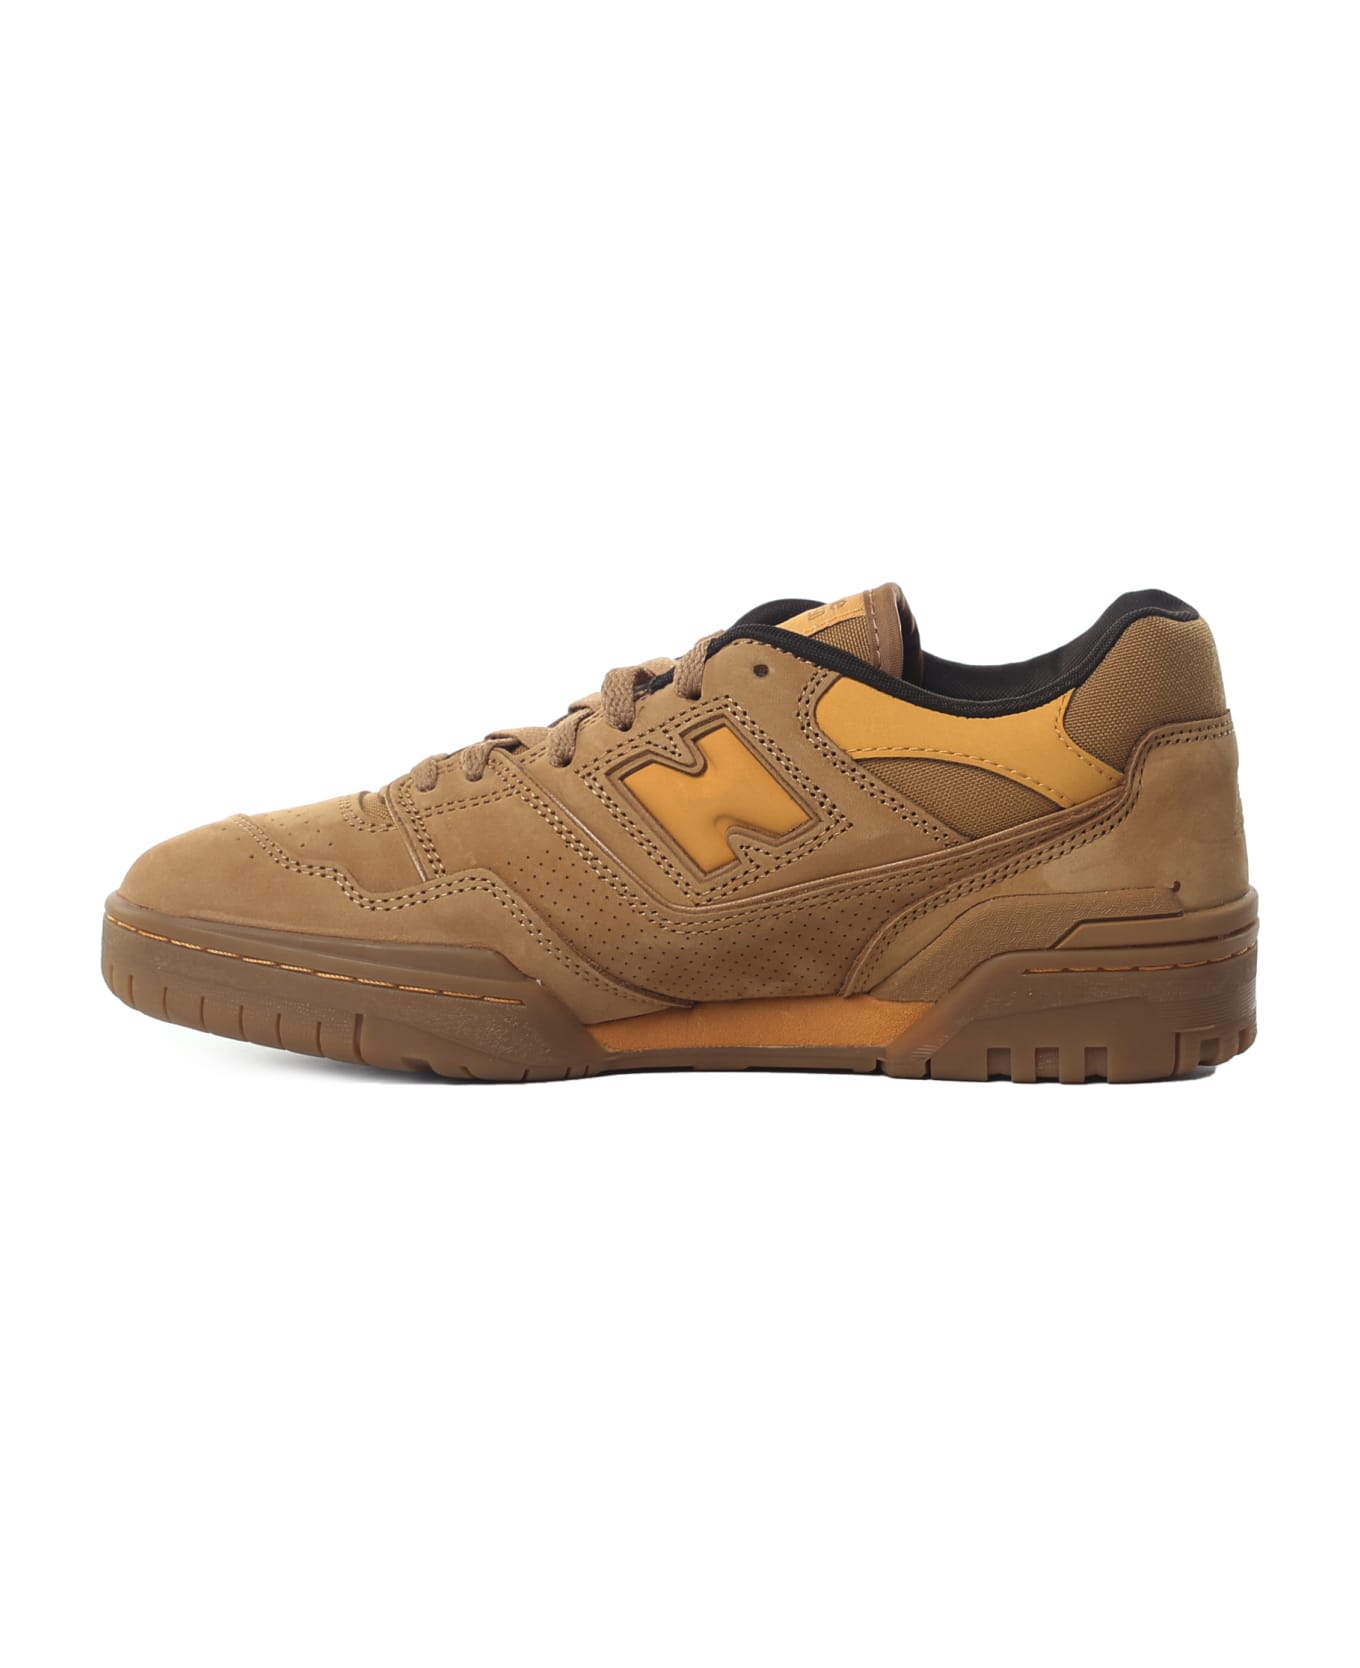 New Balance Sneakers Bb550 - Canyon